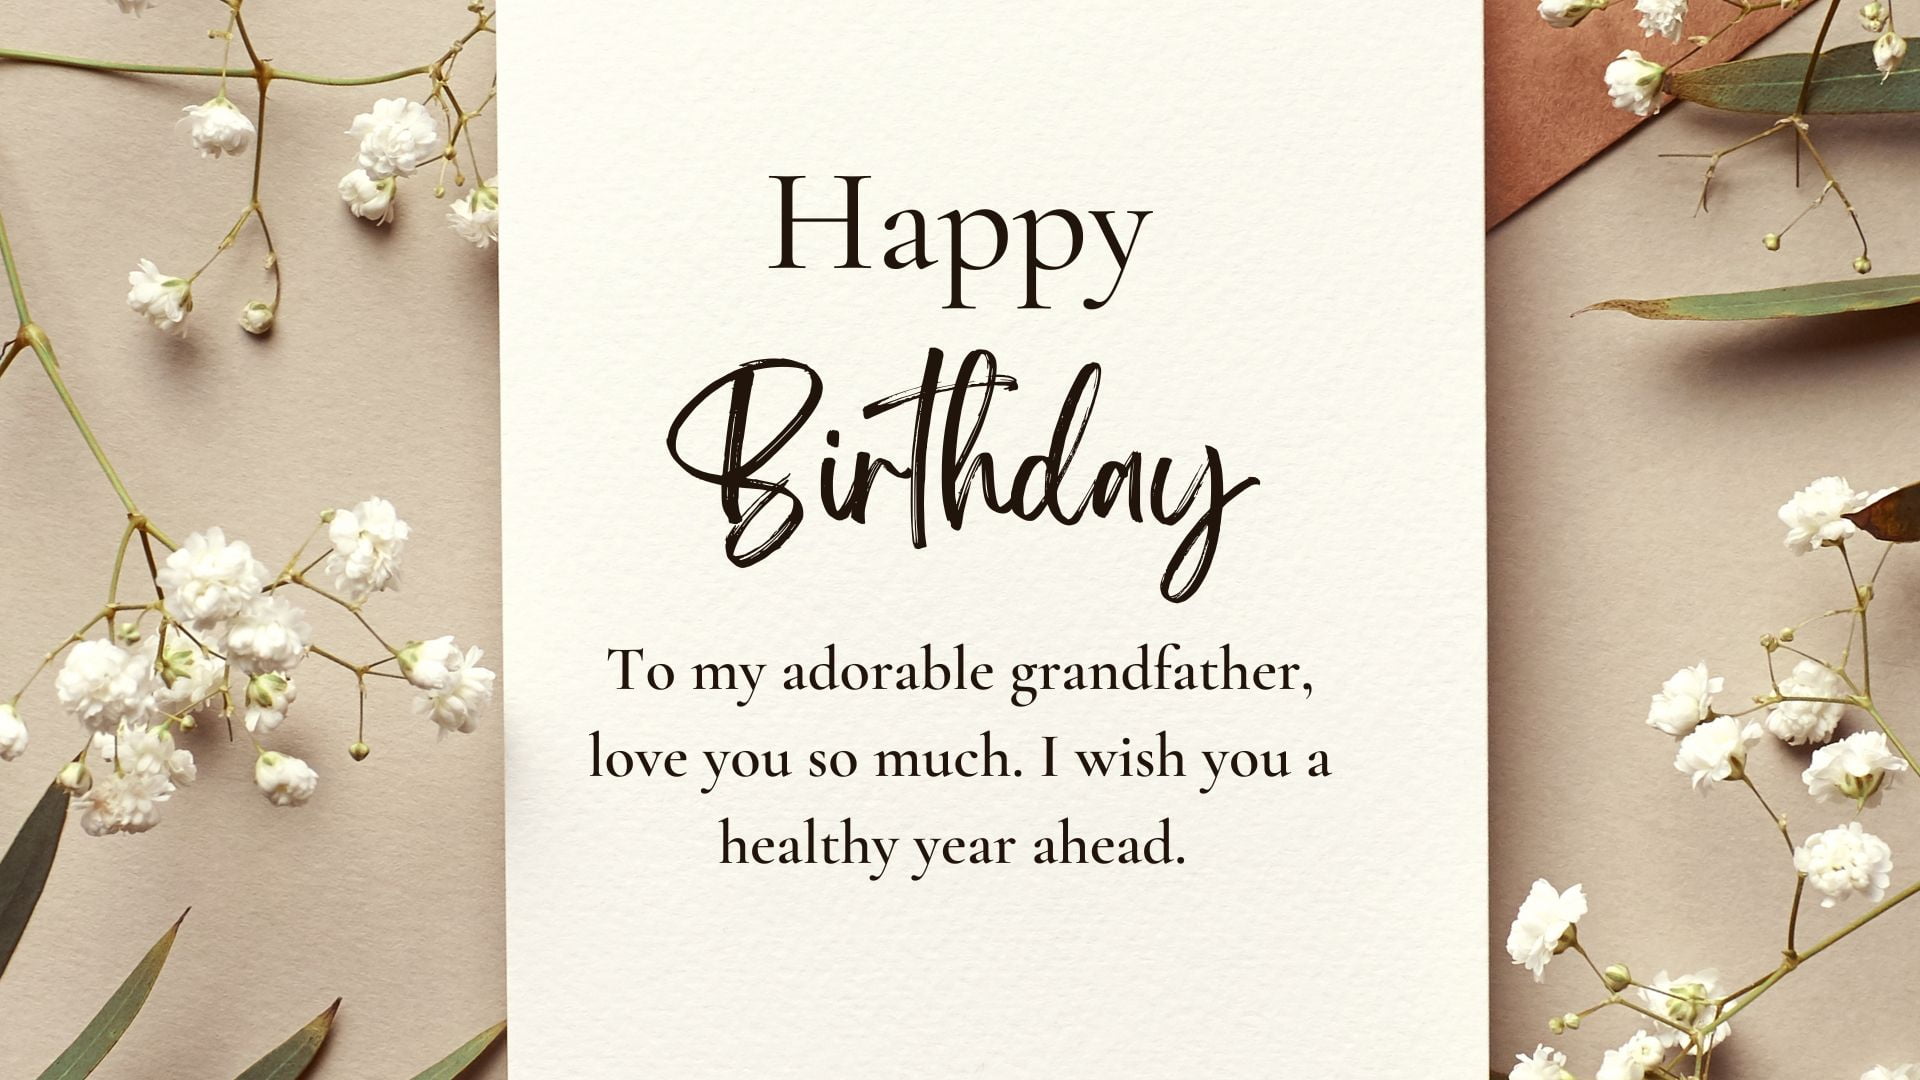 short birthday wishes for grandfather